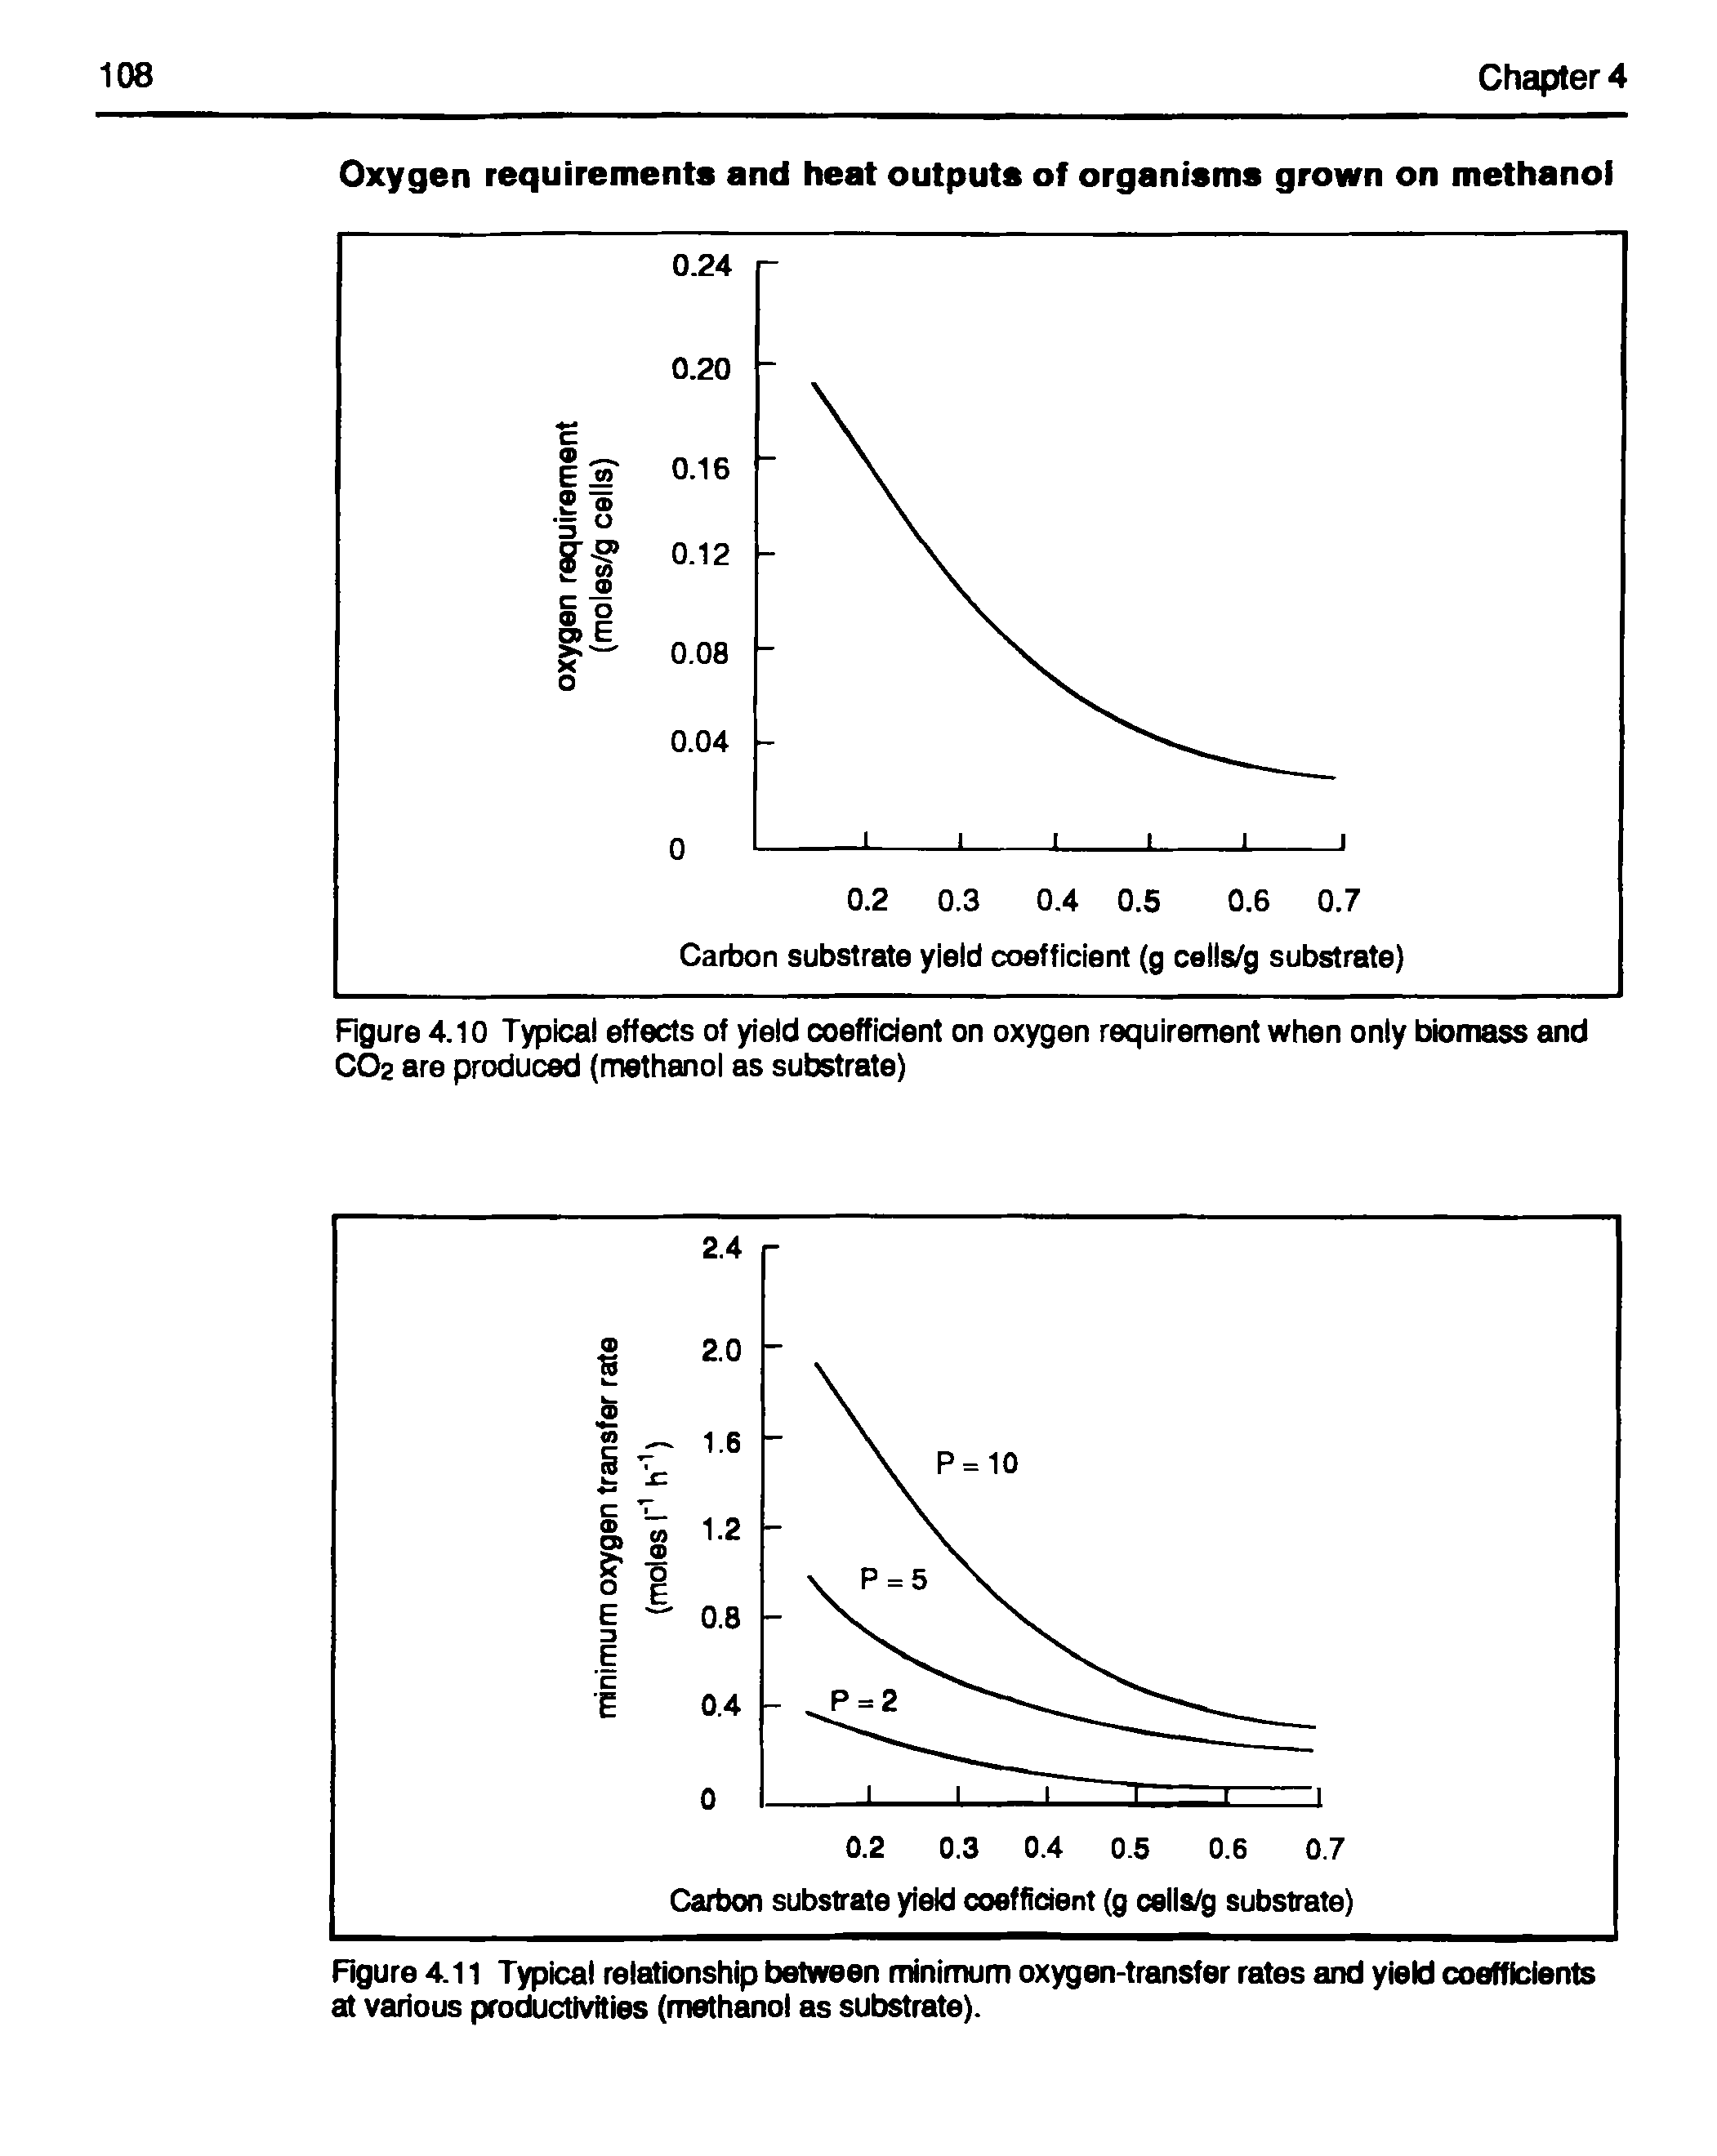 Figure 4.11 Typical relationship between minimum oxygen-transfer rates and yield coefficients at various productivities (methanol as substrate).